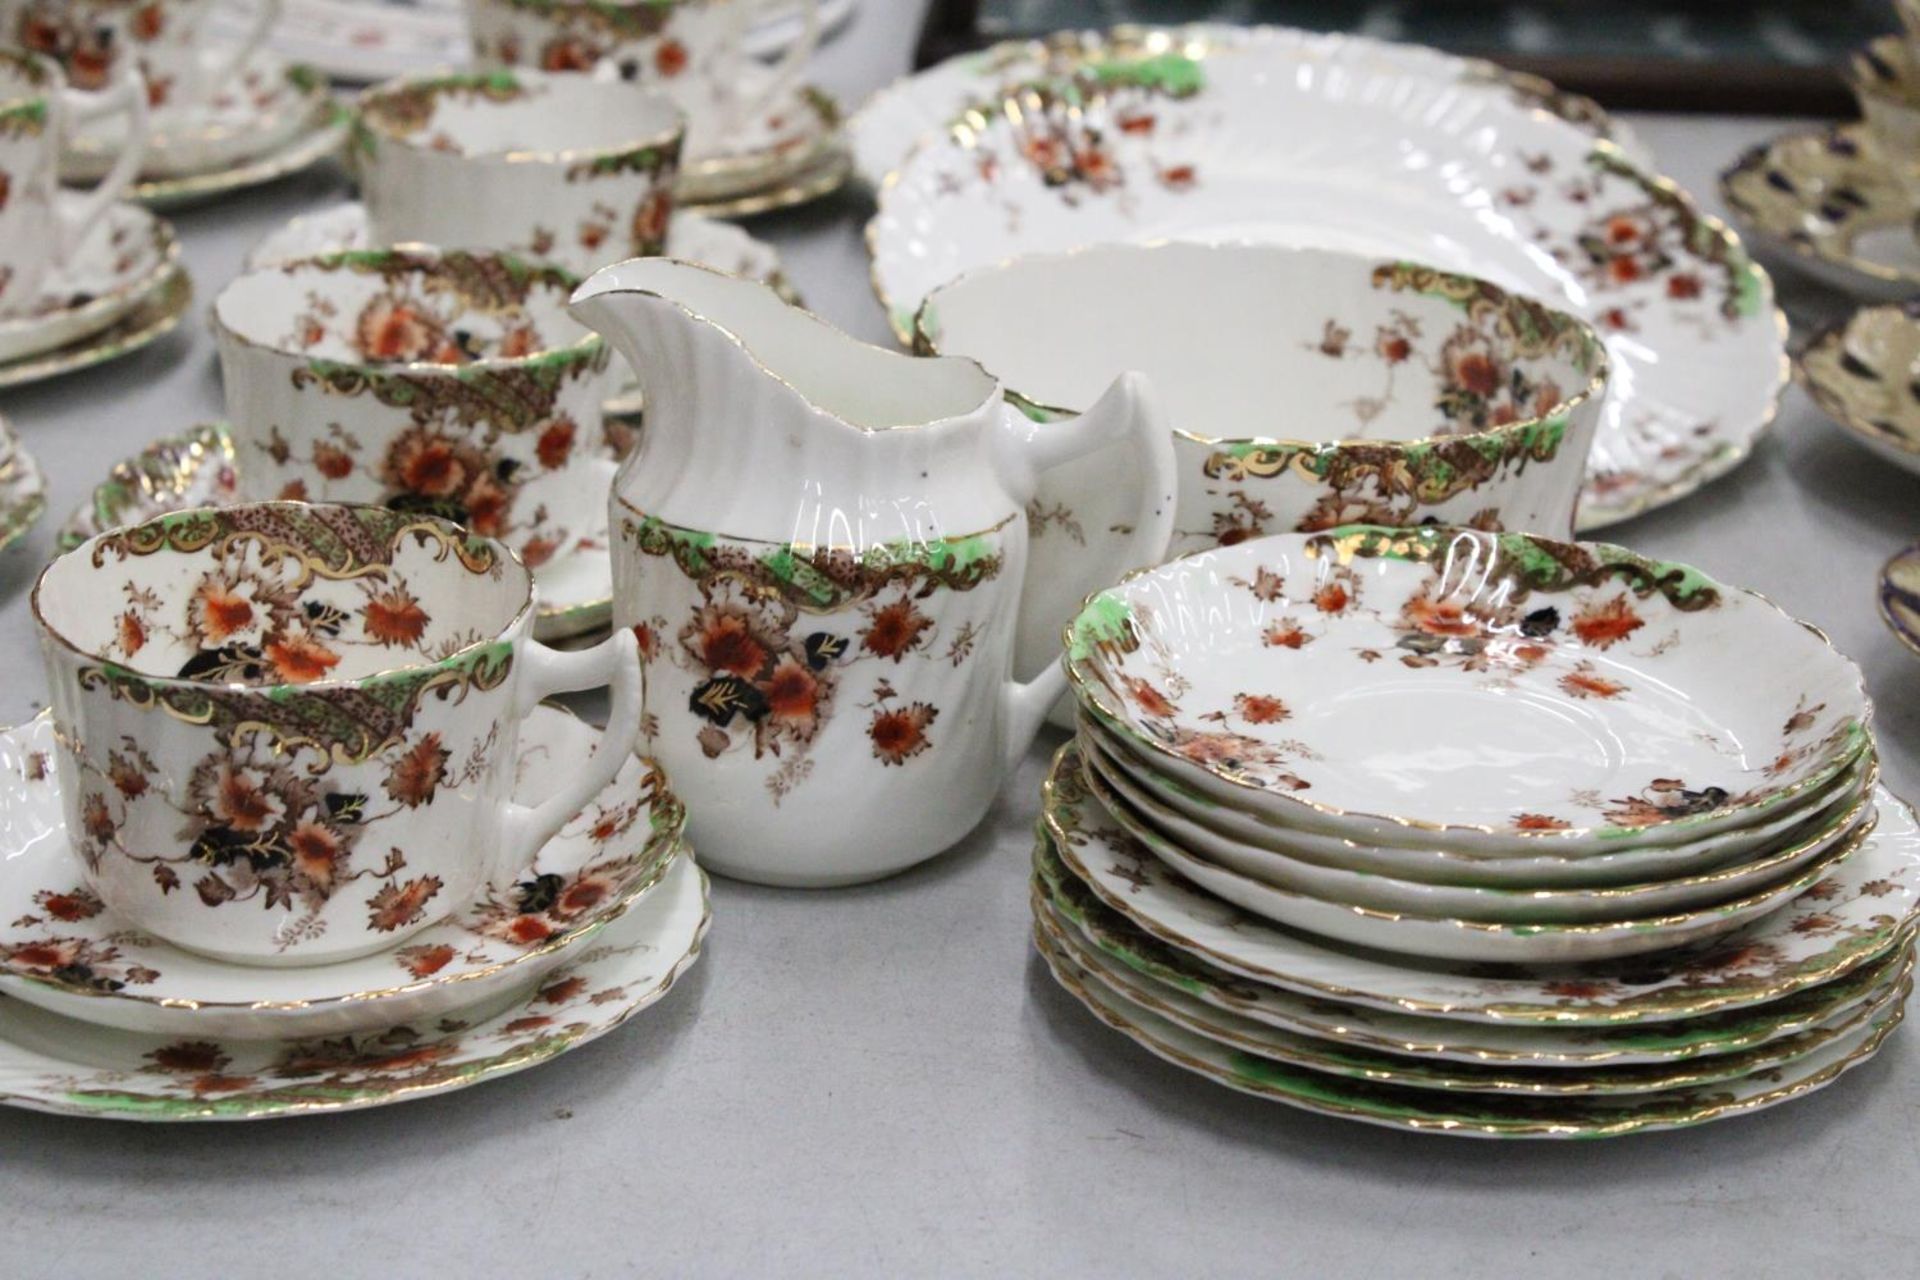 A ROYAL ALBERT CROWN CHINA "POPPY" PART TEASET TO INCLUDE CUPS, SAUCERS, SIDE PLATES AND SUGAR - Image 4 of 5